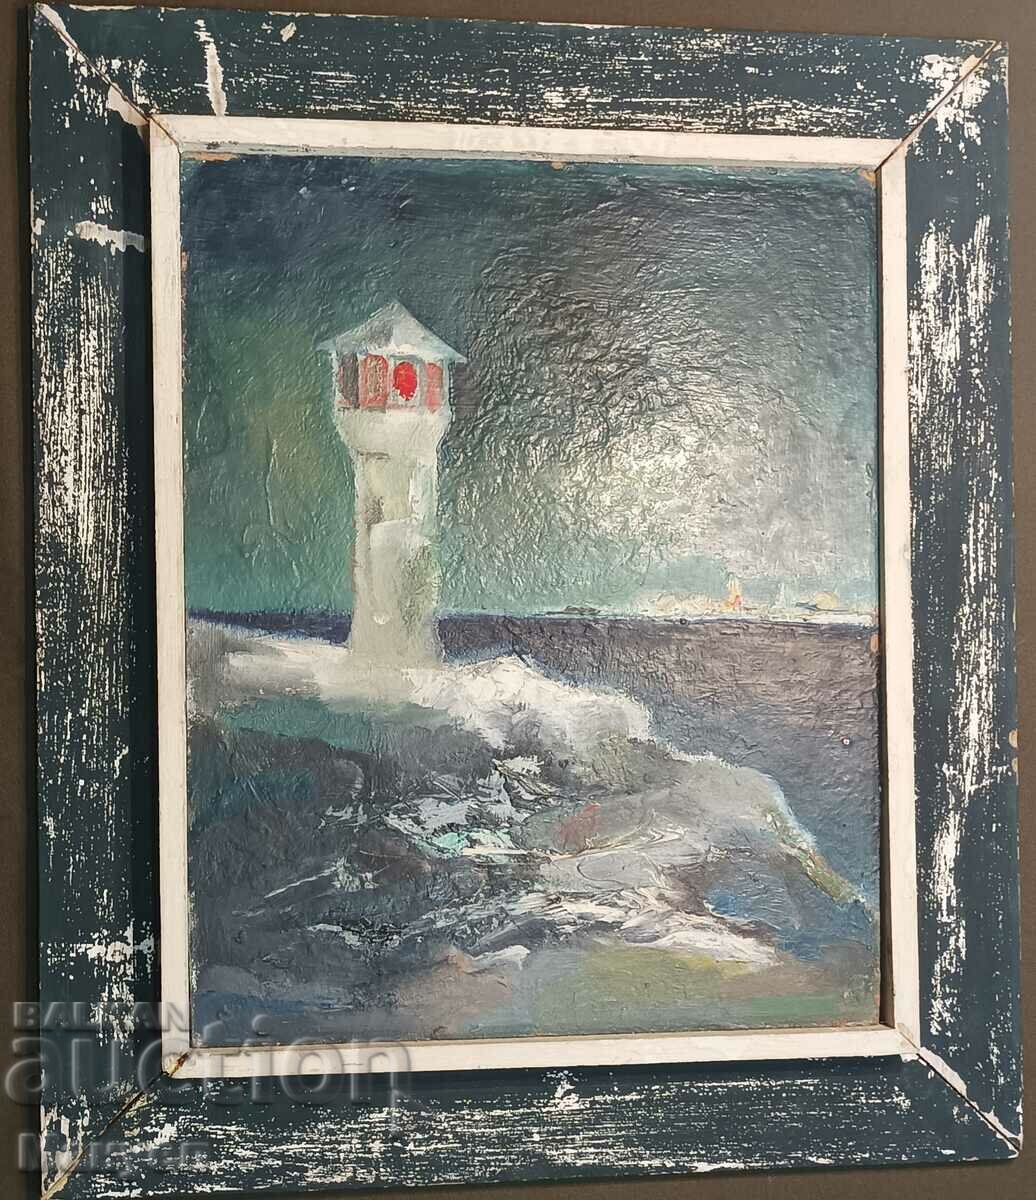 I am selling an old sea painting.